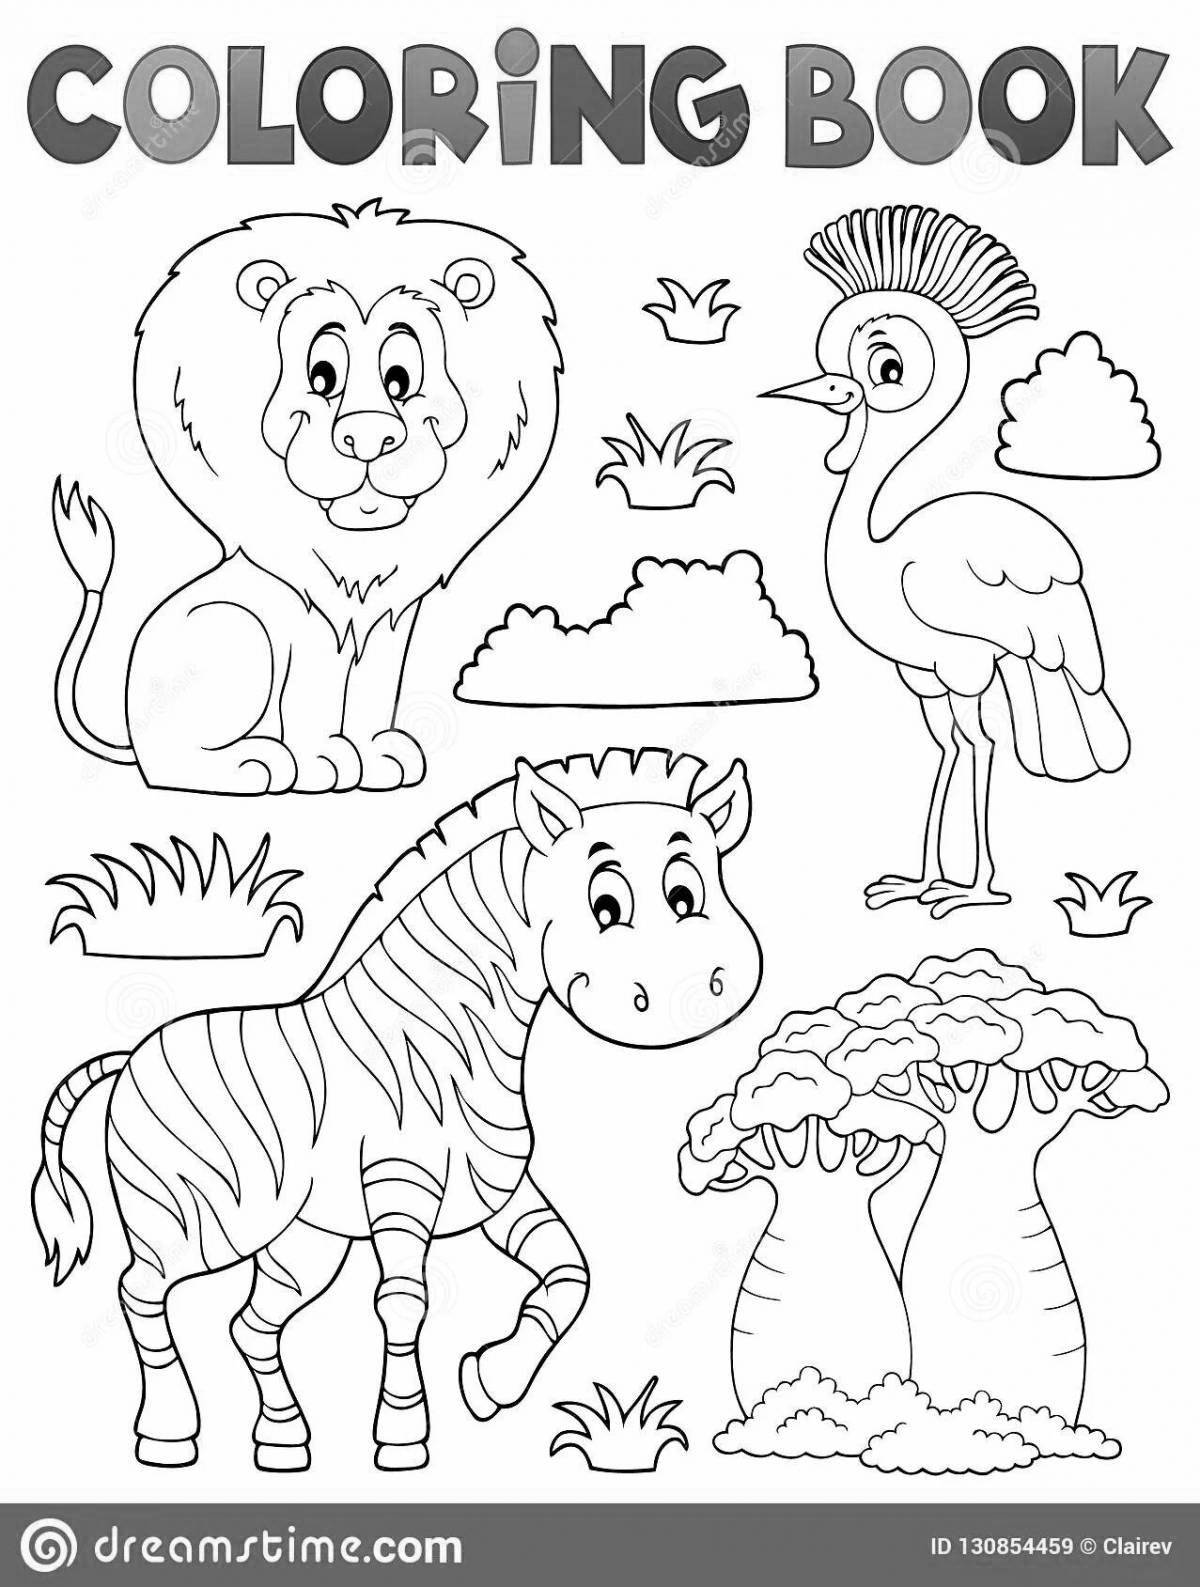 Gorgeous coloring of African animals for children 5-7 years old